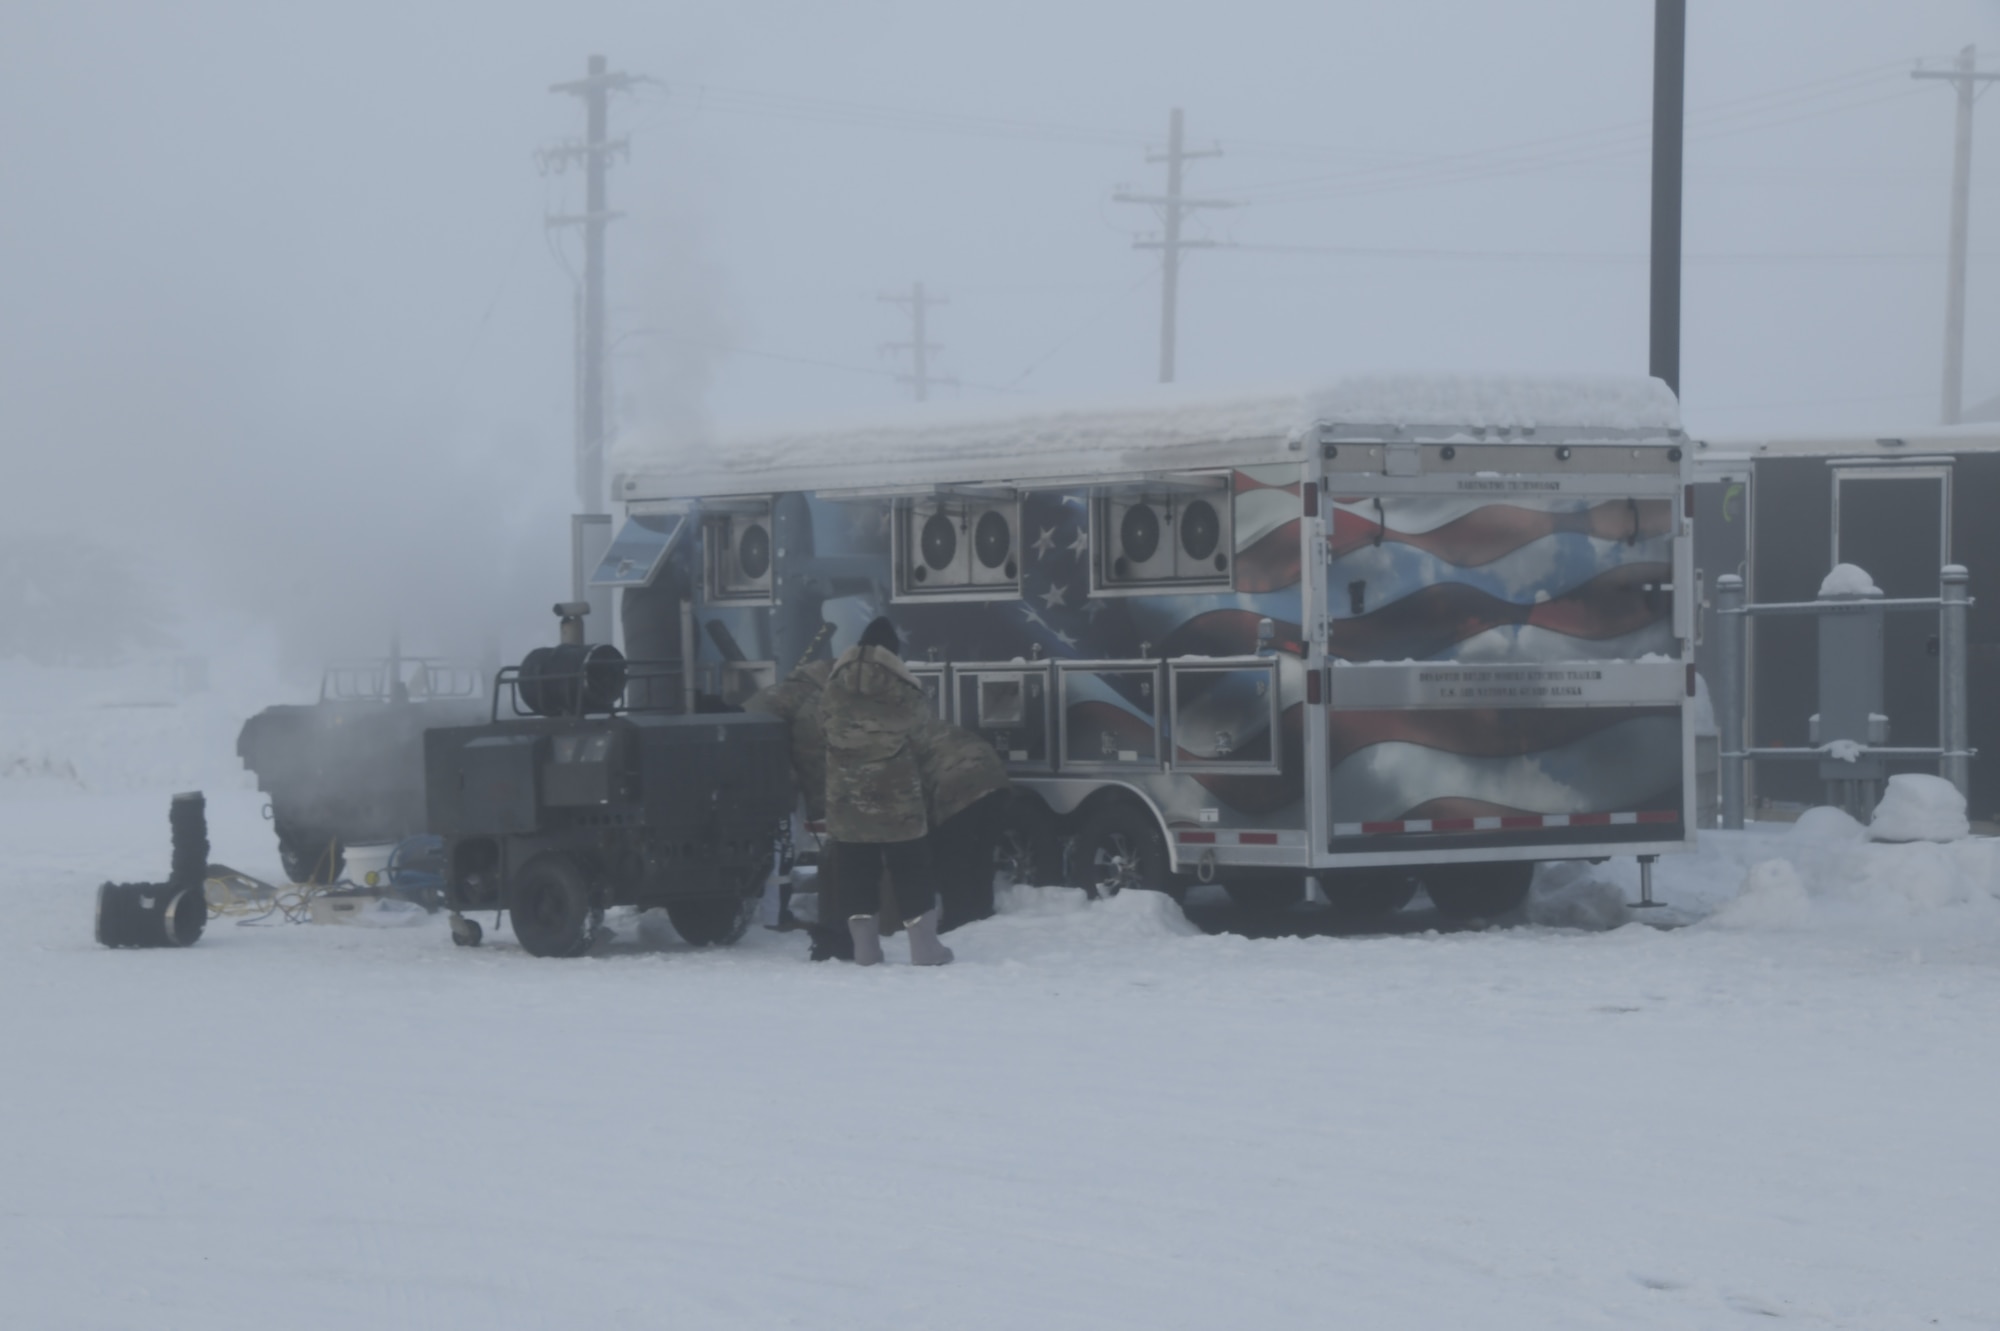 168th Services Airmen prepare and test the Disaster Relief Mobile Kitchen trailer in -40 degree temperatures.